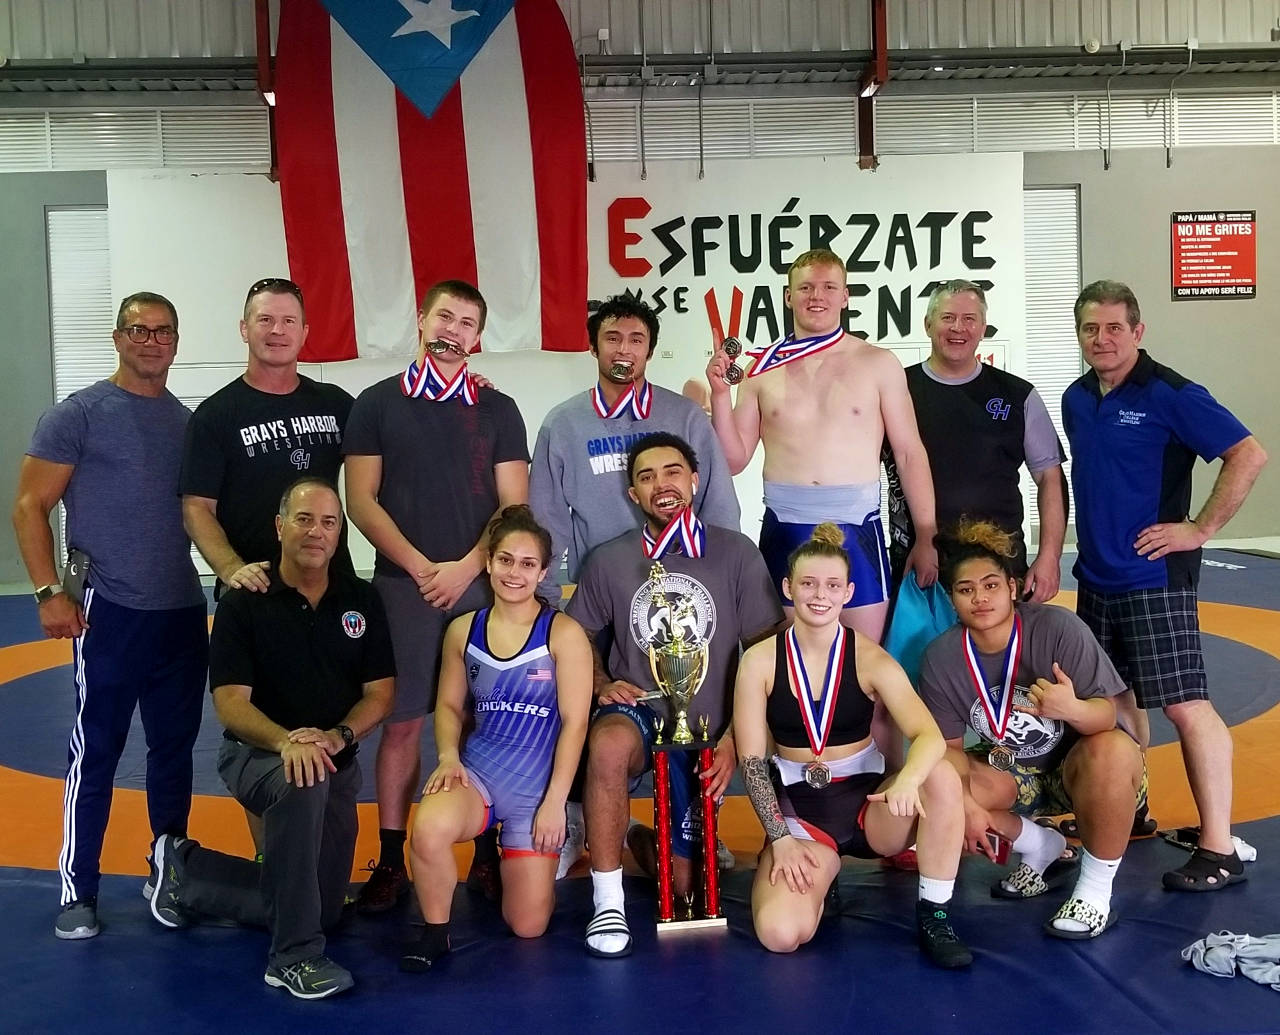 The Grays Harbor College wrestling team had multiple wrestlers place at a holiday tournament in San Juan, Puerto Rico over the weekend. Pictured are (front row, from left): PR Olympic referee Robert Lugo, Cynthia Diaz, Darrien Walters, Southern Oregon University’s (and future GHC wrestler) Kaylee Gaines and Sila Fotu, (back row) PR wrestling champion Jose Betancourt, GHC coach Kevin Pine, Eastern Washington’s Dalton Swayze, Andy Gonzales, Noah Winder, GHC coach Phillip Pine, GHC assistant coach Chris Boeger. (Submitted photo)